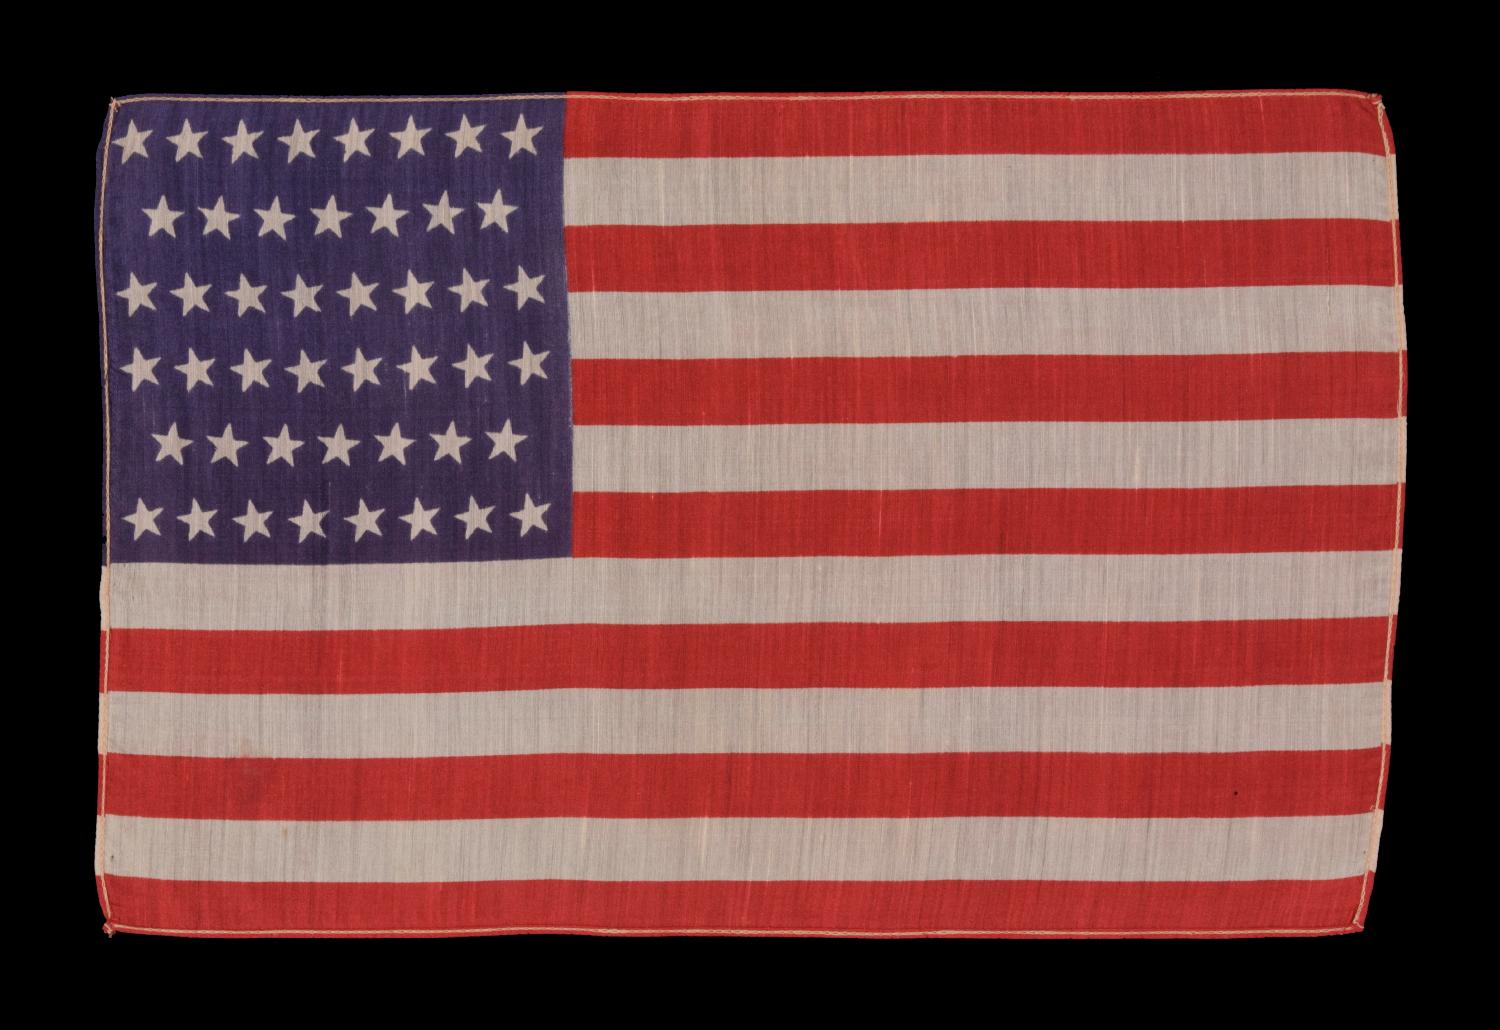 46 stars in canted rows on an antique American parade flag made of silk, 1907-1912, Oklahoma Statehood:

46 star American parade flag, printed on silk. Oklahoma joined the Union as the 46th state on November 16th, 1907, during Teddy Roosevelt’s